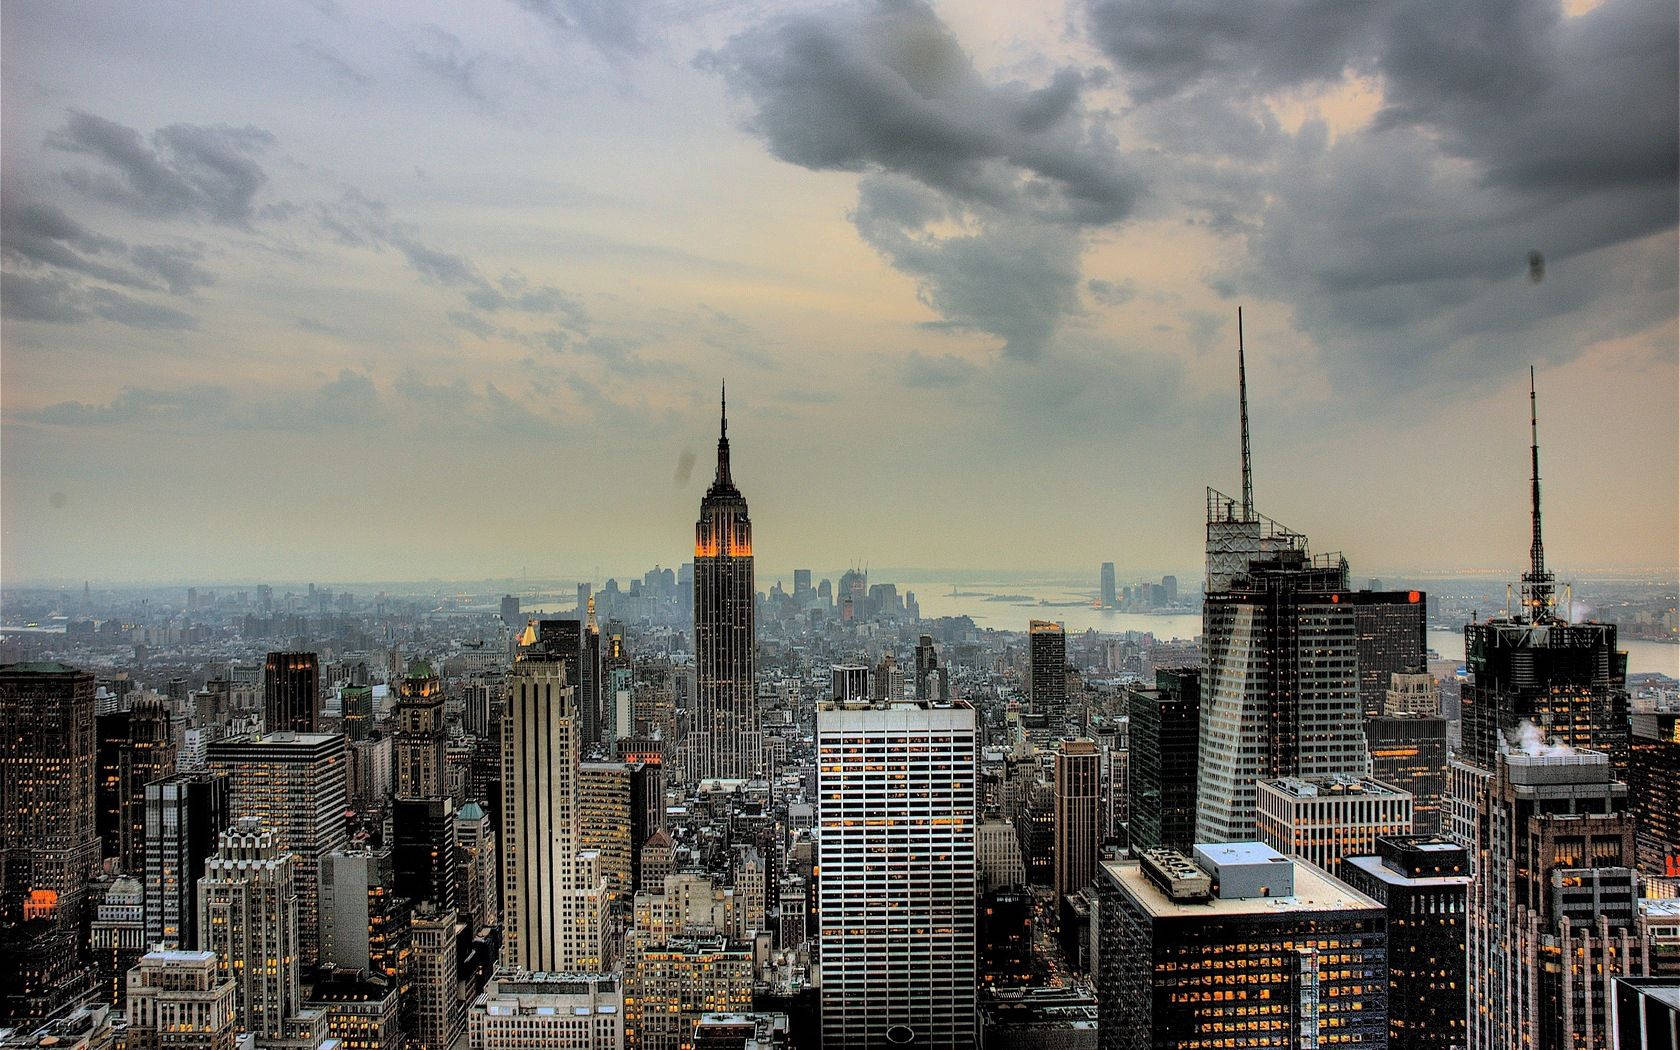 New York City Skyline on a Cloudy Day Wallpaper